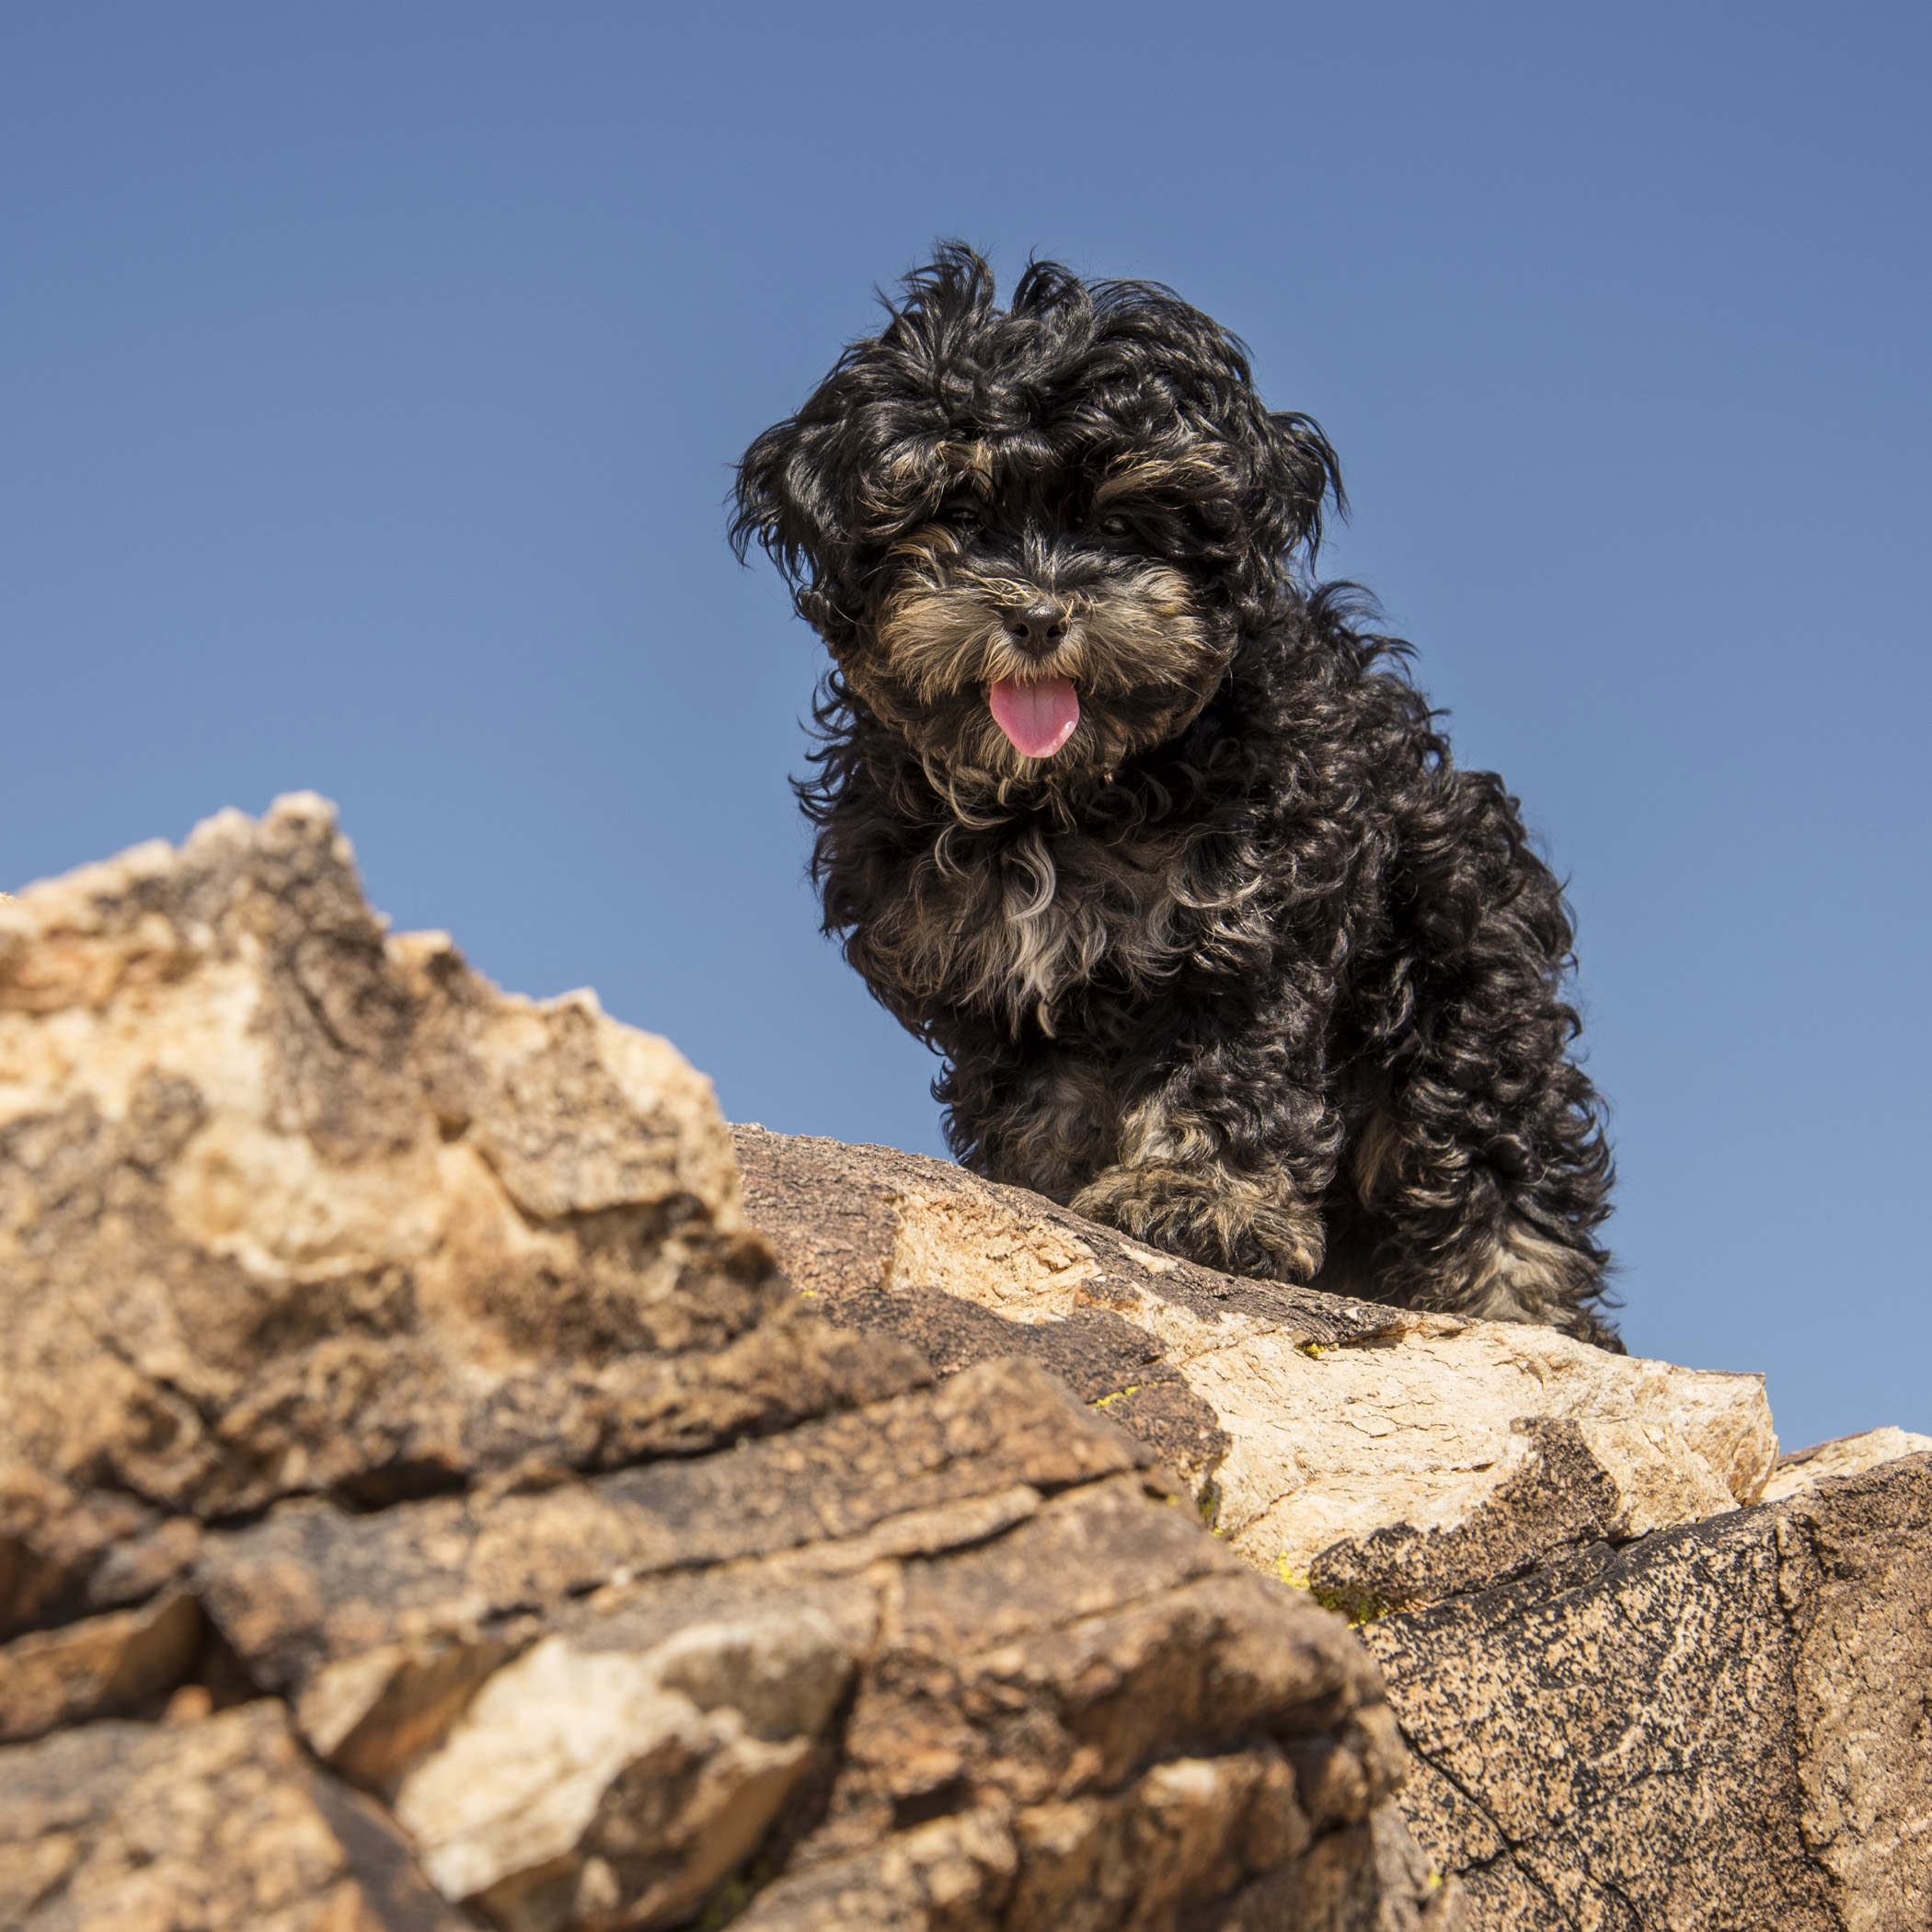  My first rock climbing adventure…I may have little legs, but I’m one brave pup! 